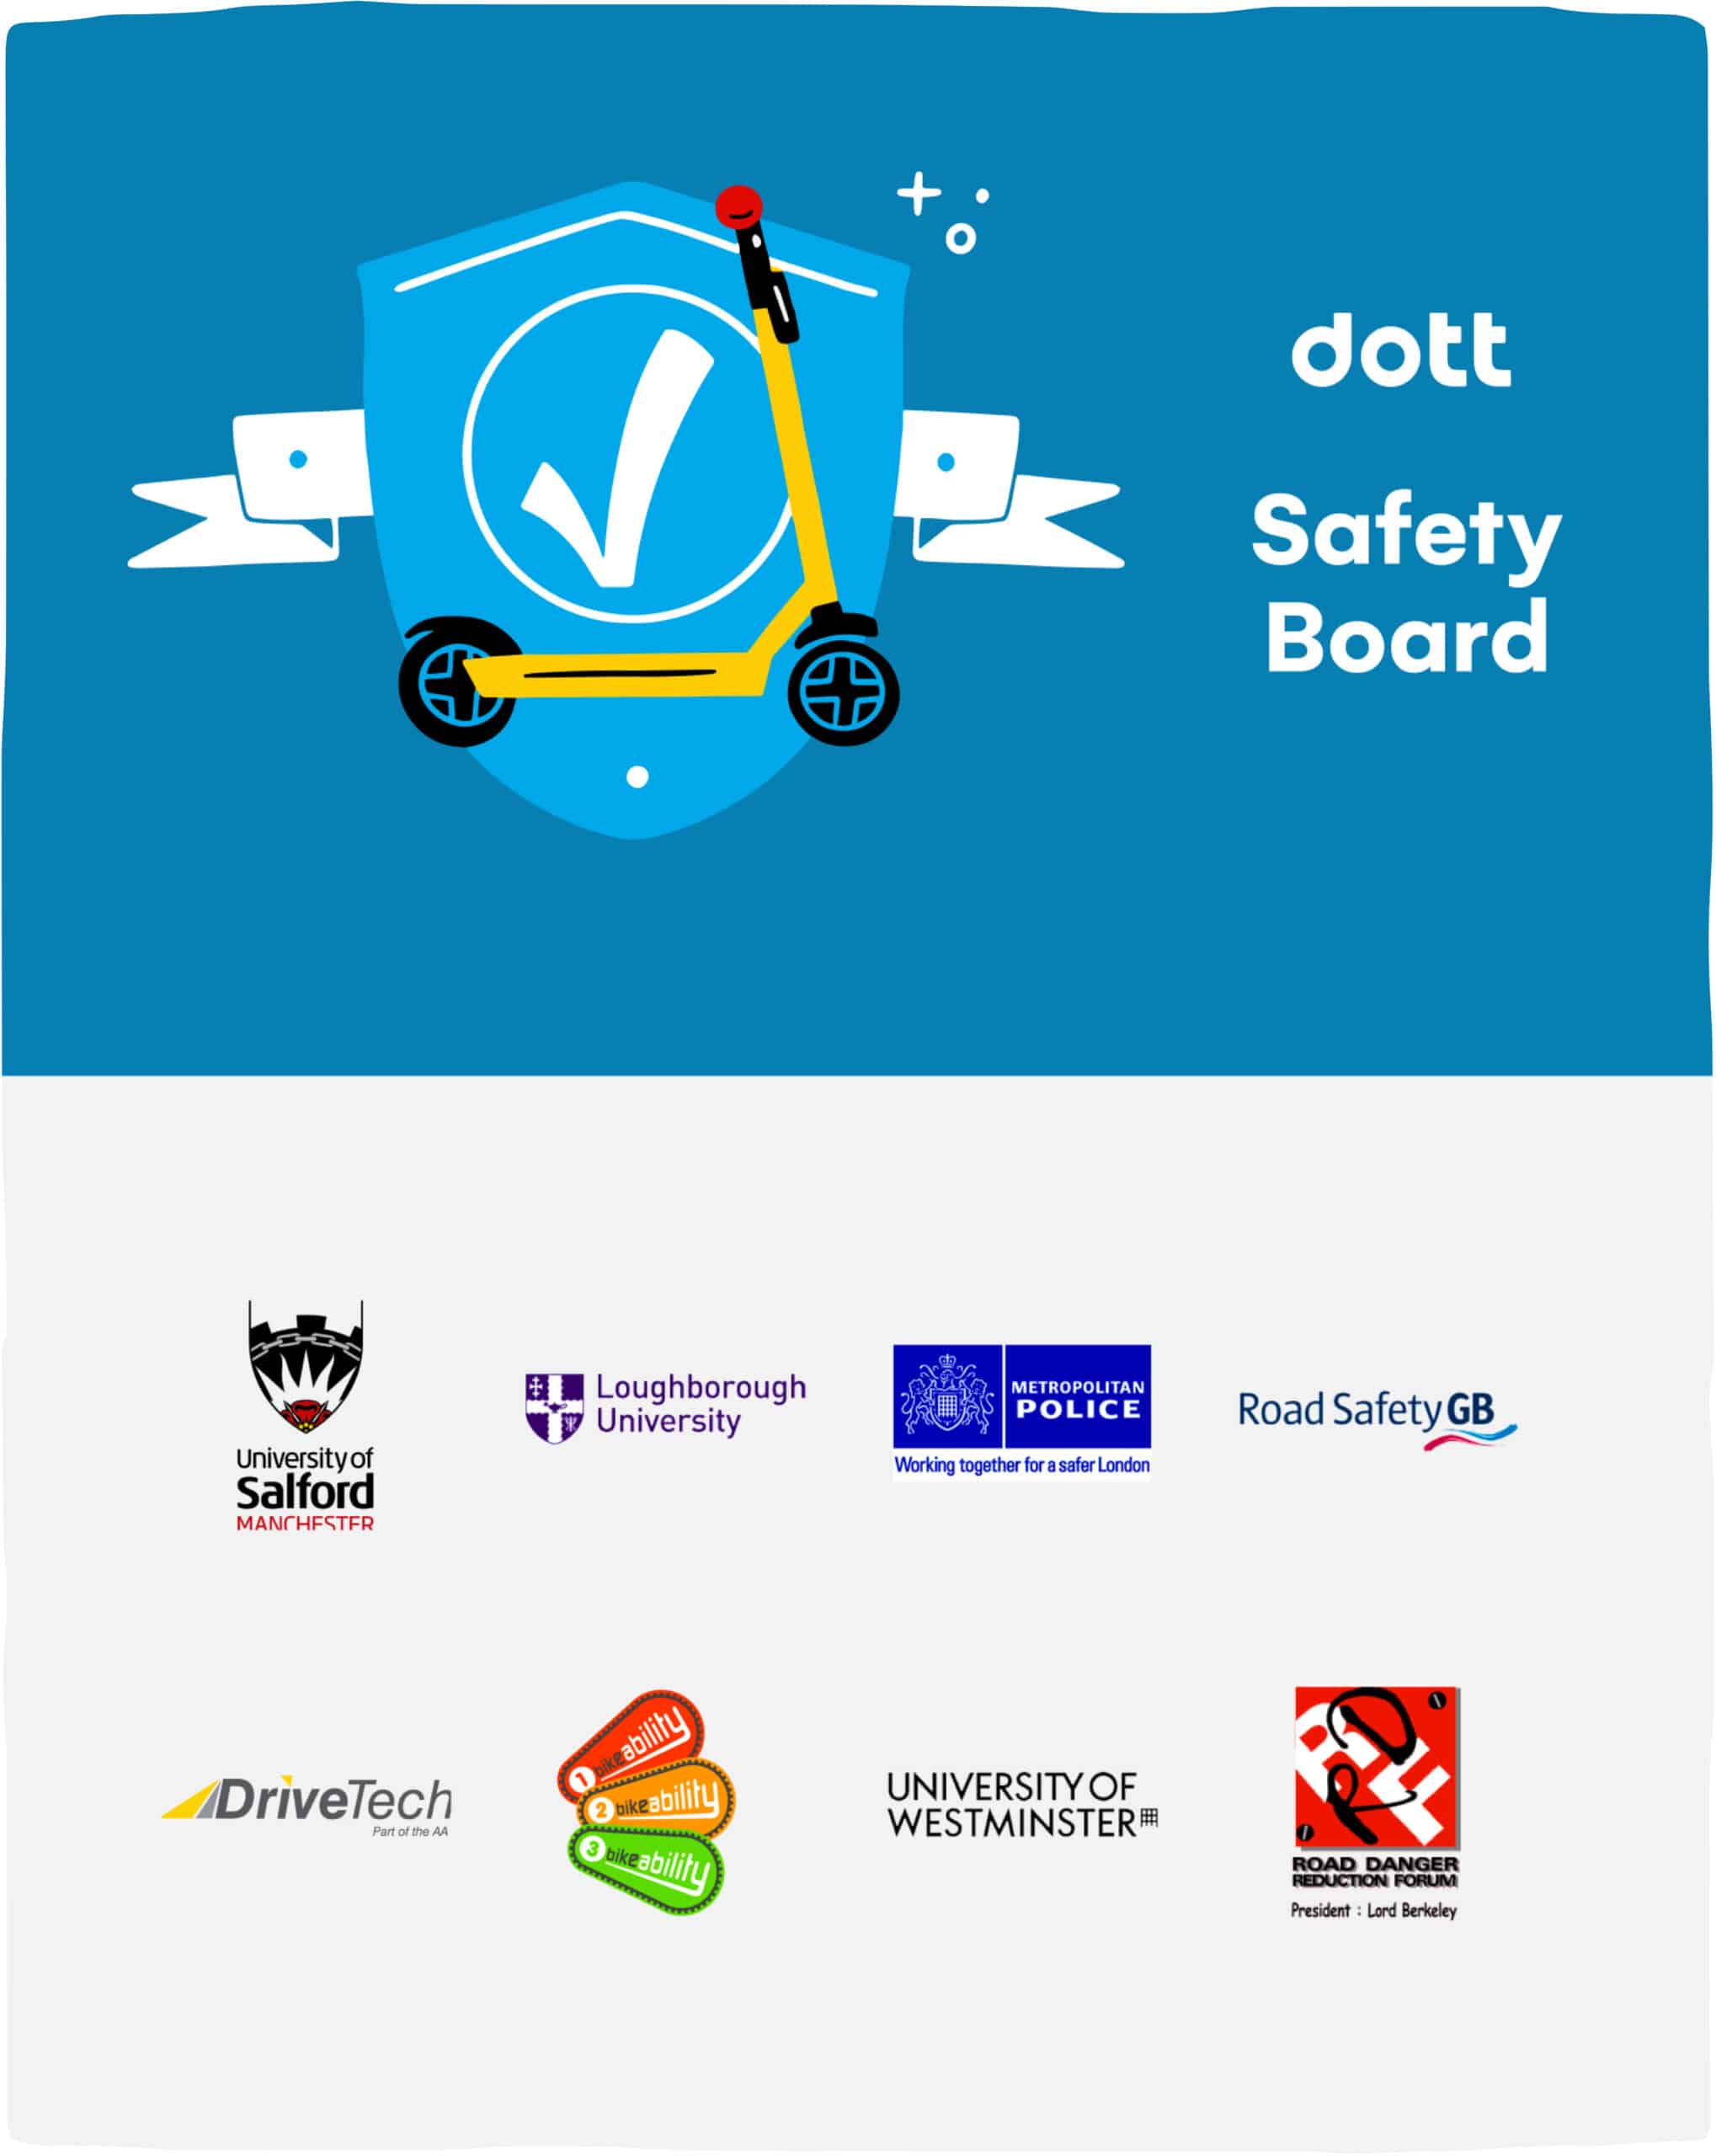 An image of the different organizations, authorities and charities that make up the Dott Safety Board.